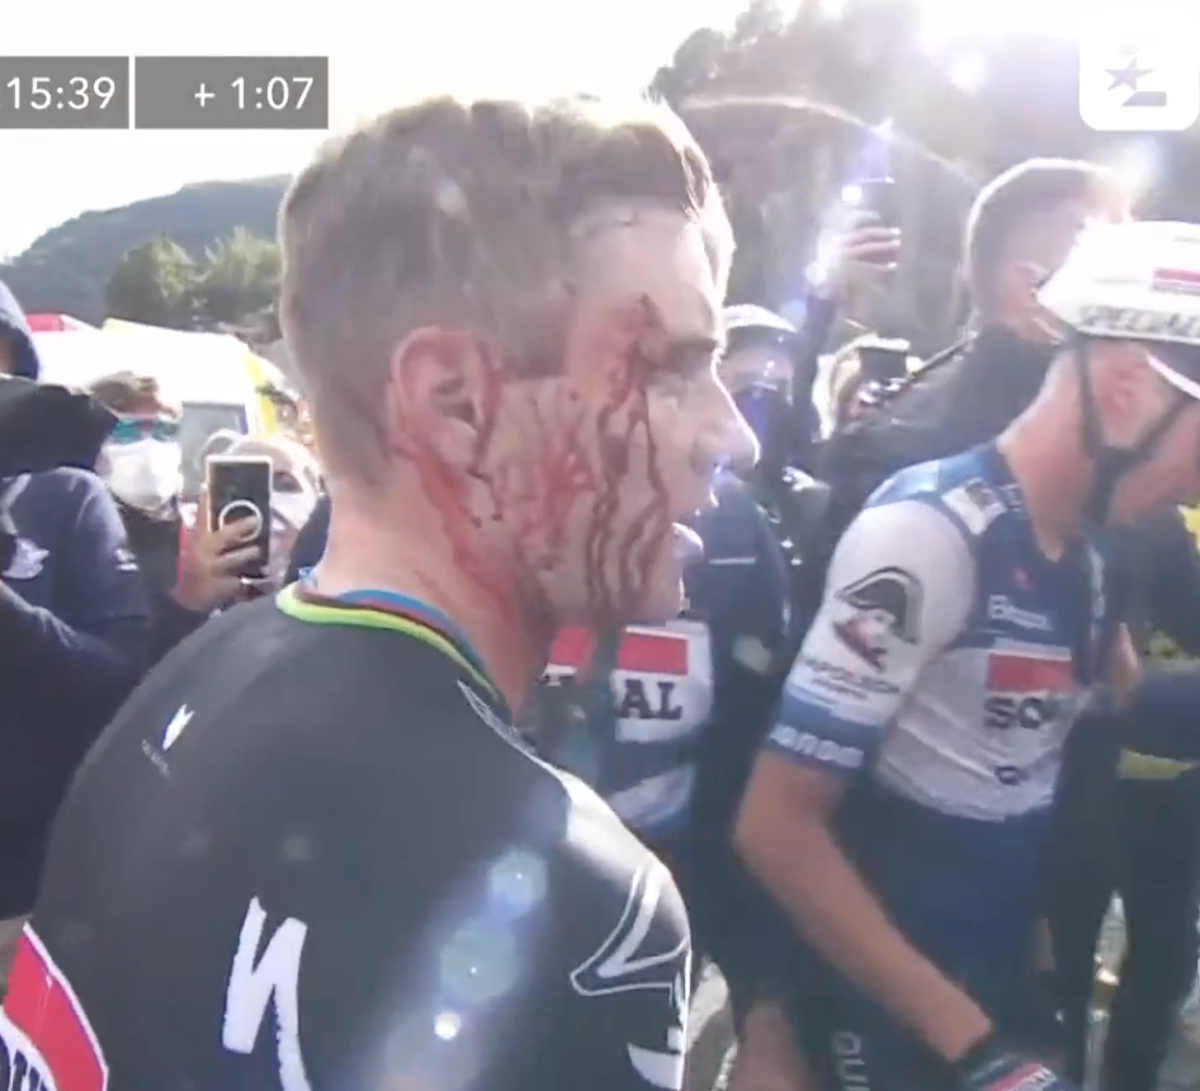 Remco Evenepoel crashes into woman at finish line after winning Vuelta stage 3